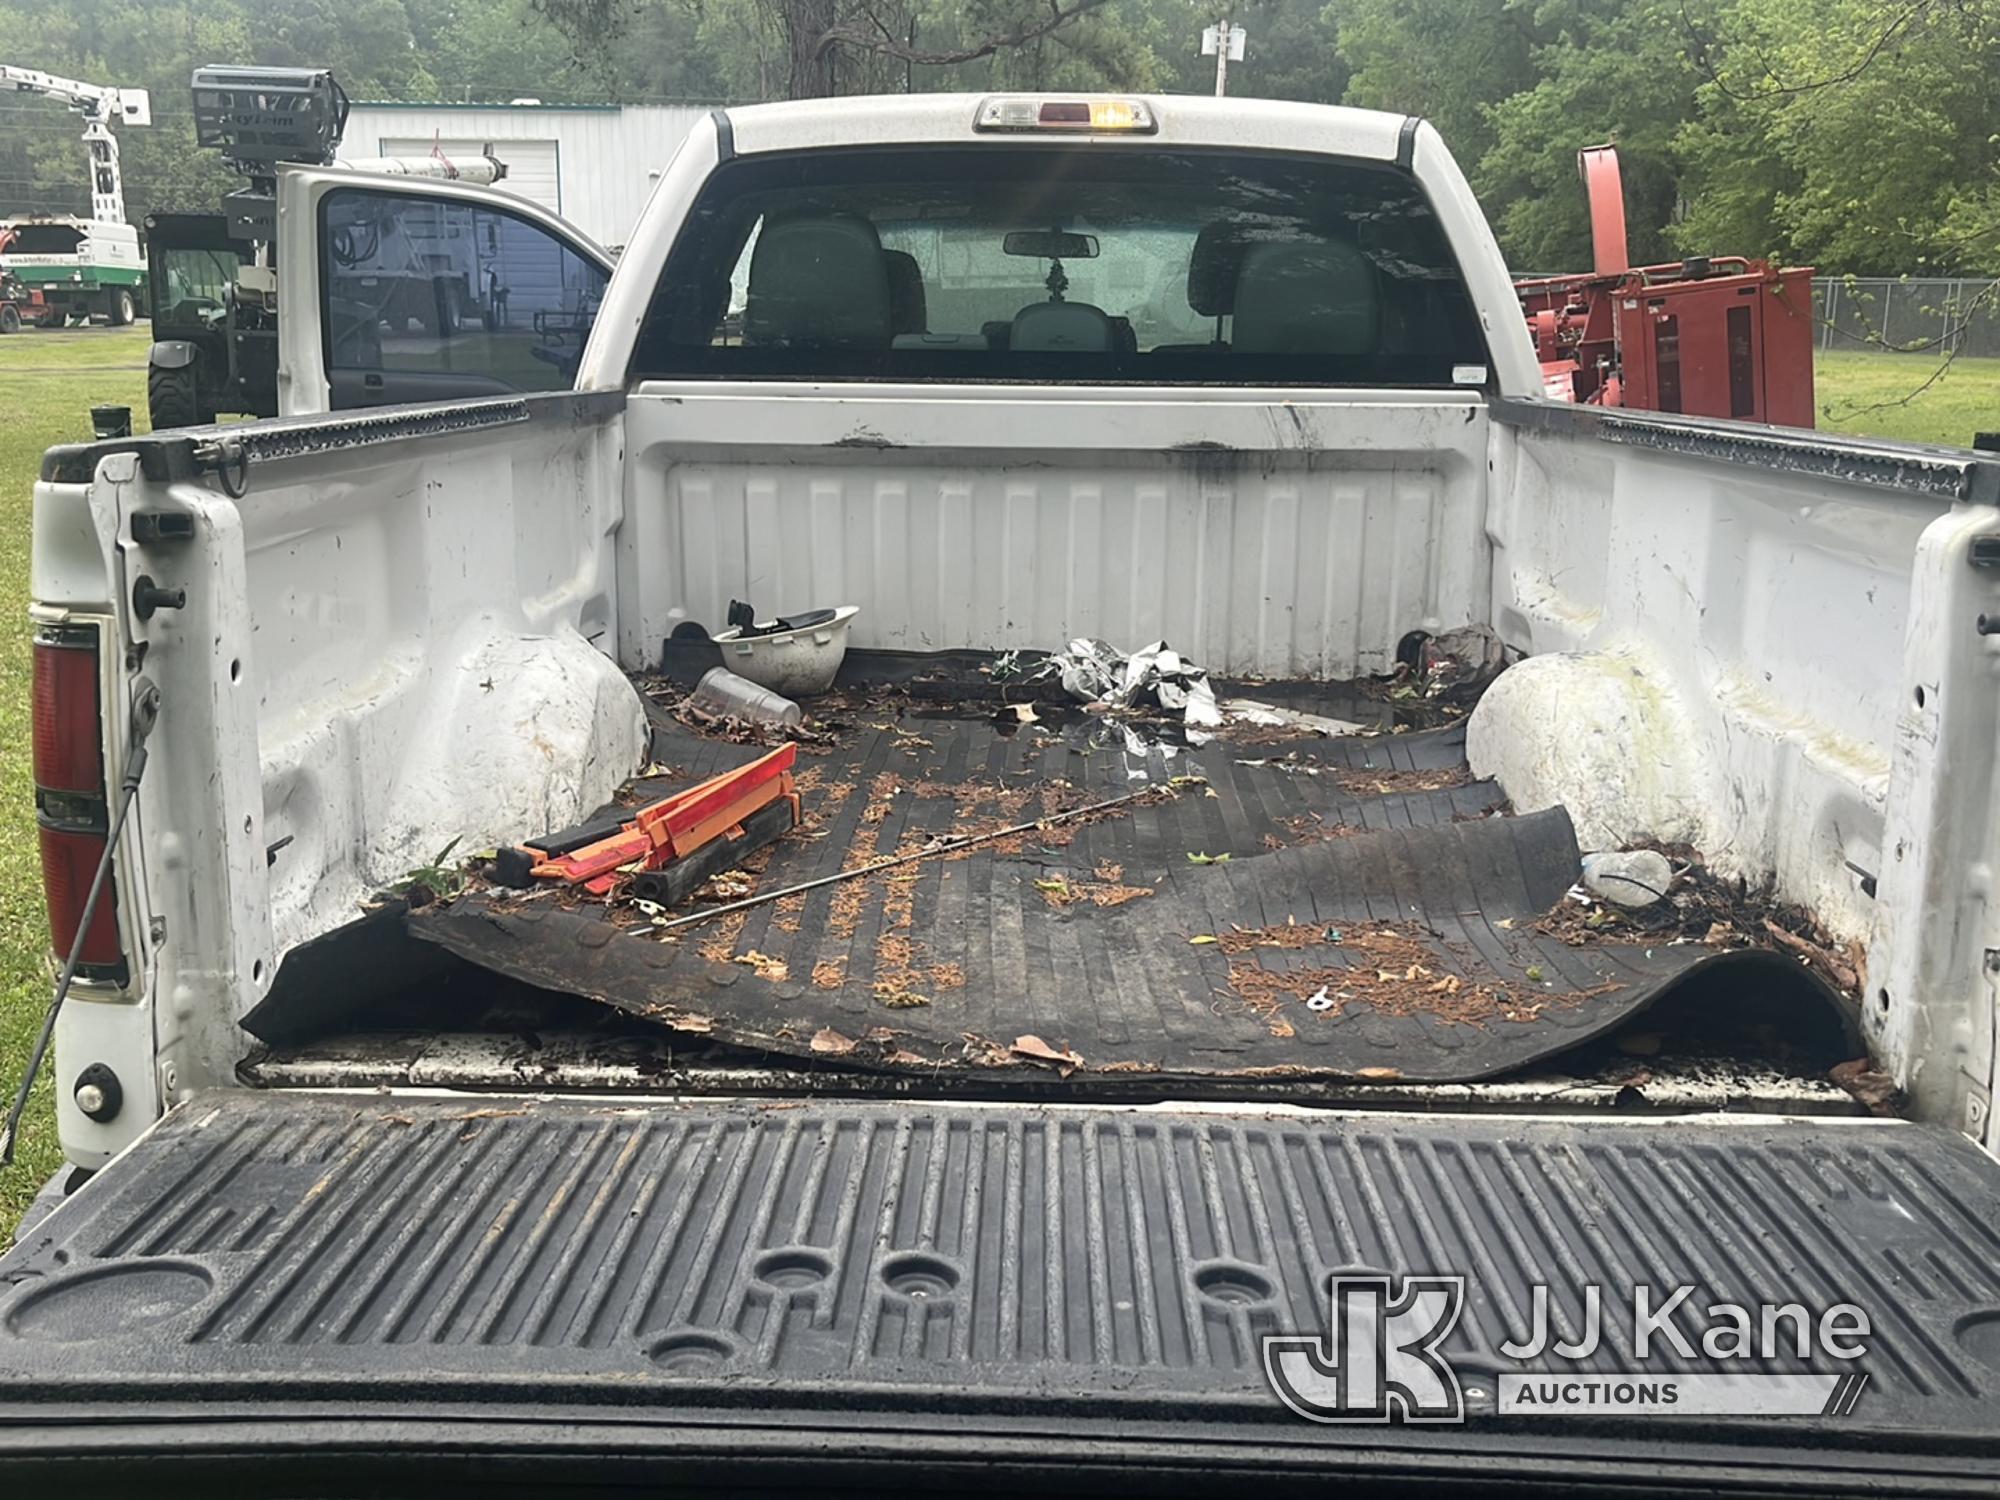 (Bennettsville, SC) 2014 Ford F150 4x4 Extended-Cab Pickup Truck Runs Rough & Moves) (Shuts Off, Bod